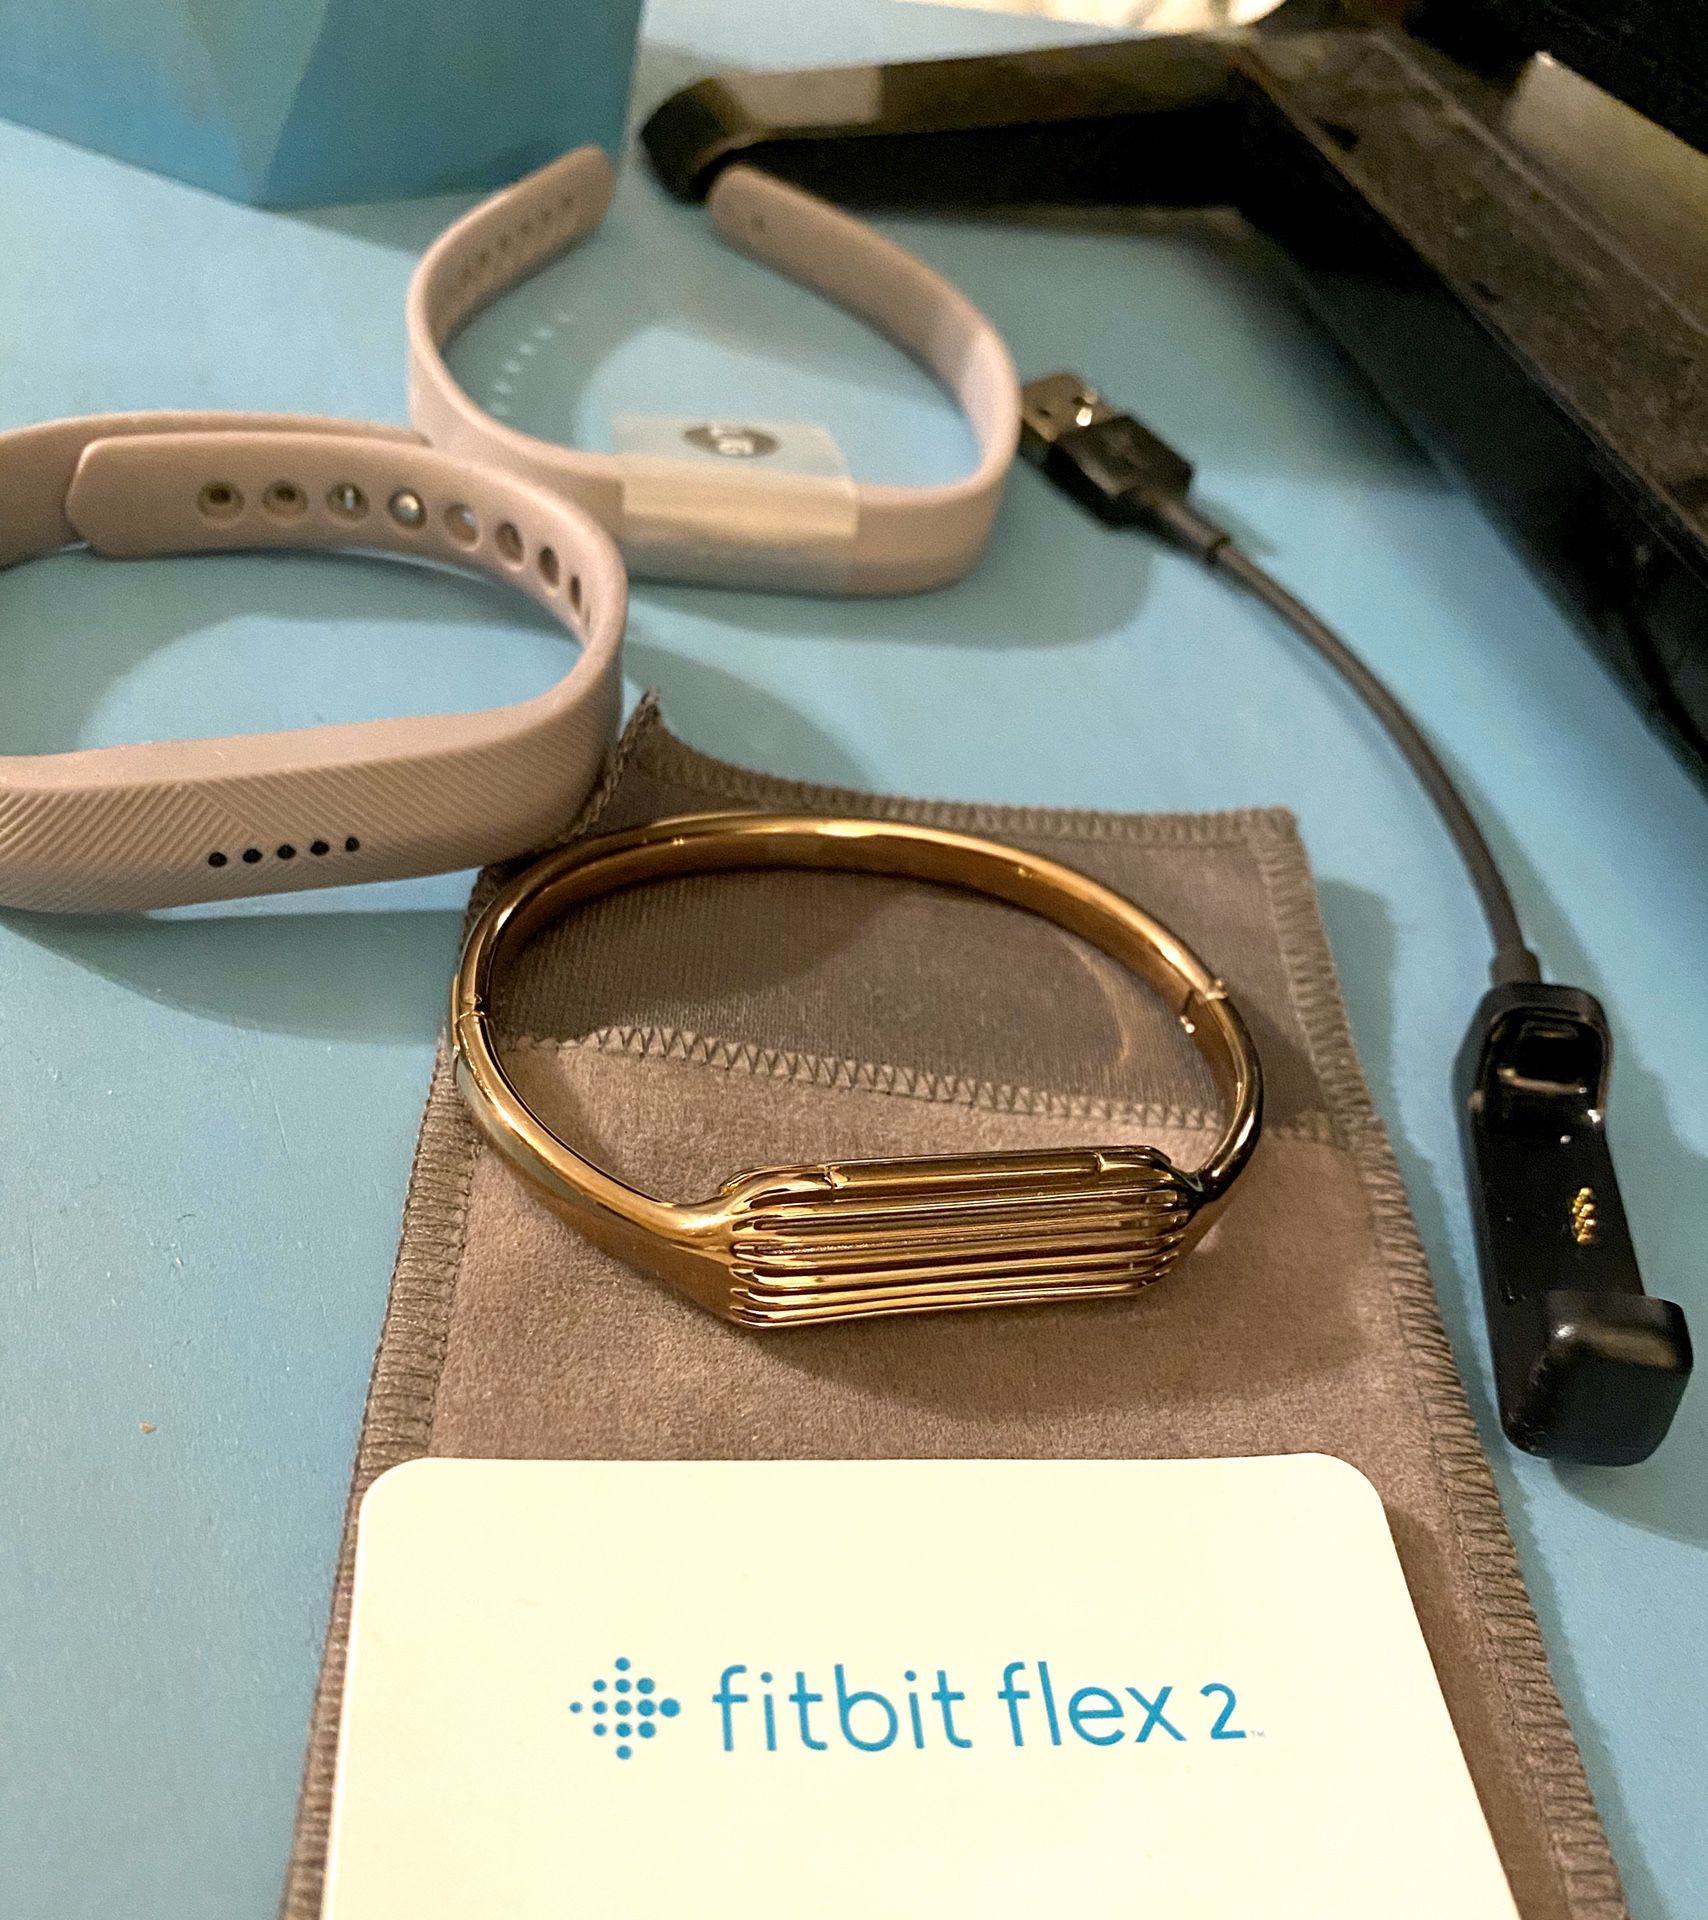 Fitbit Flex 2 and Gold Bangle